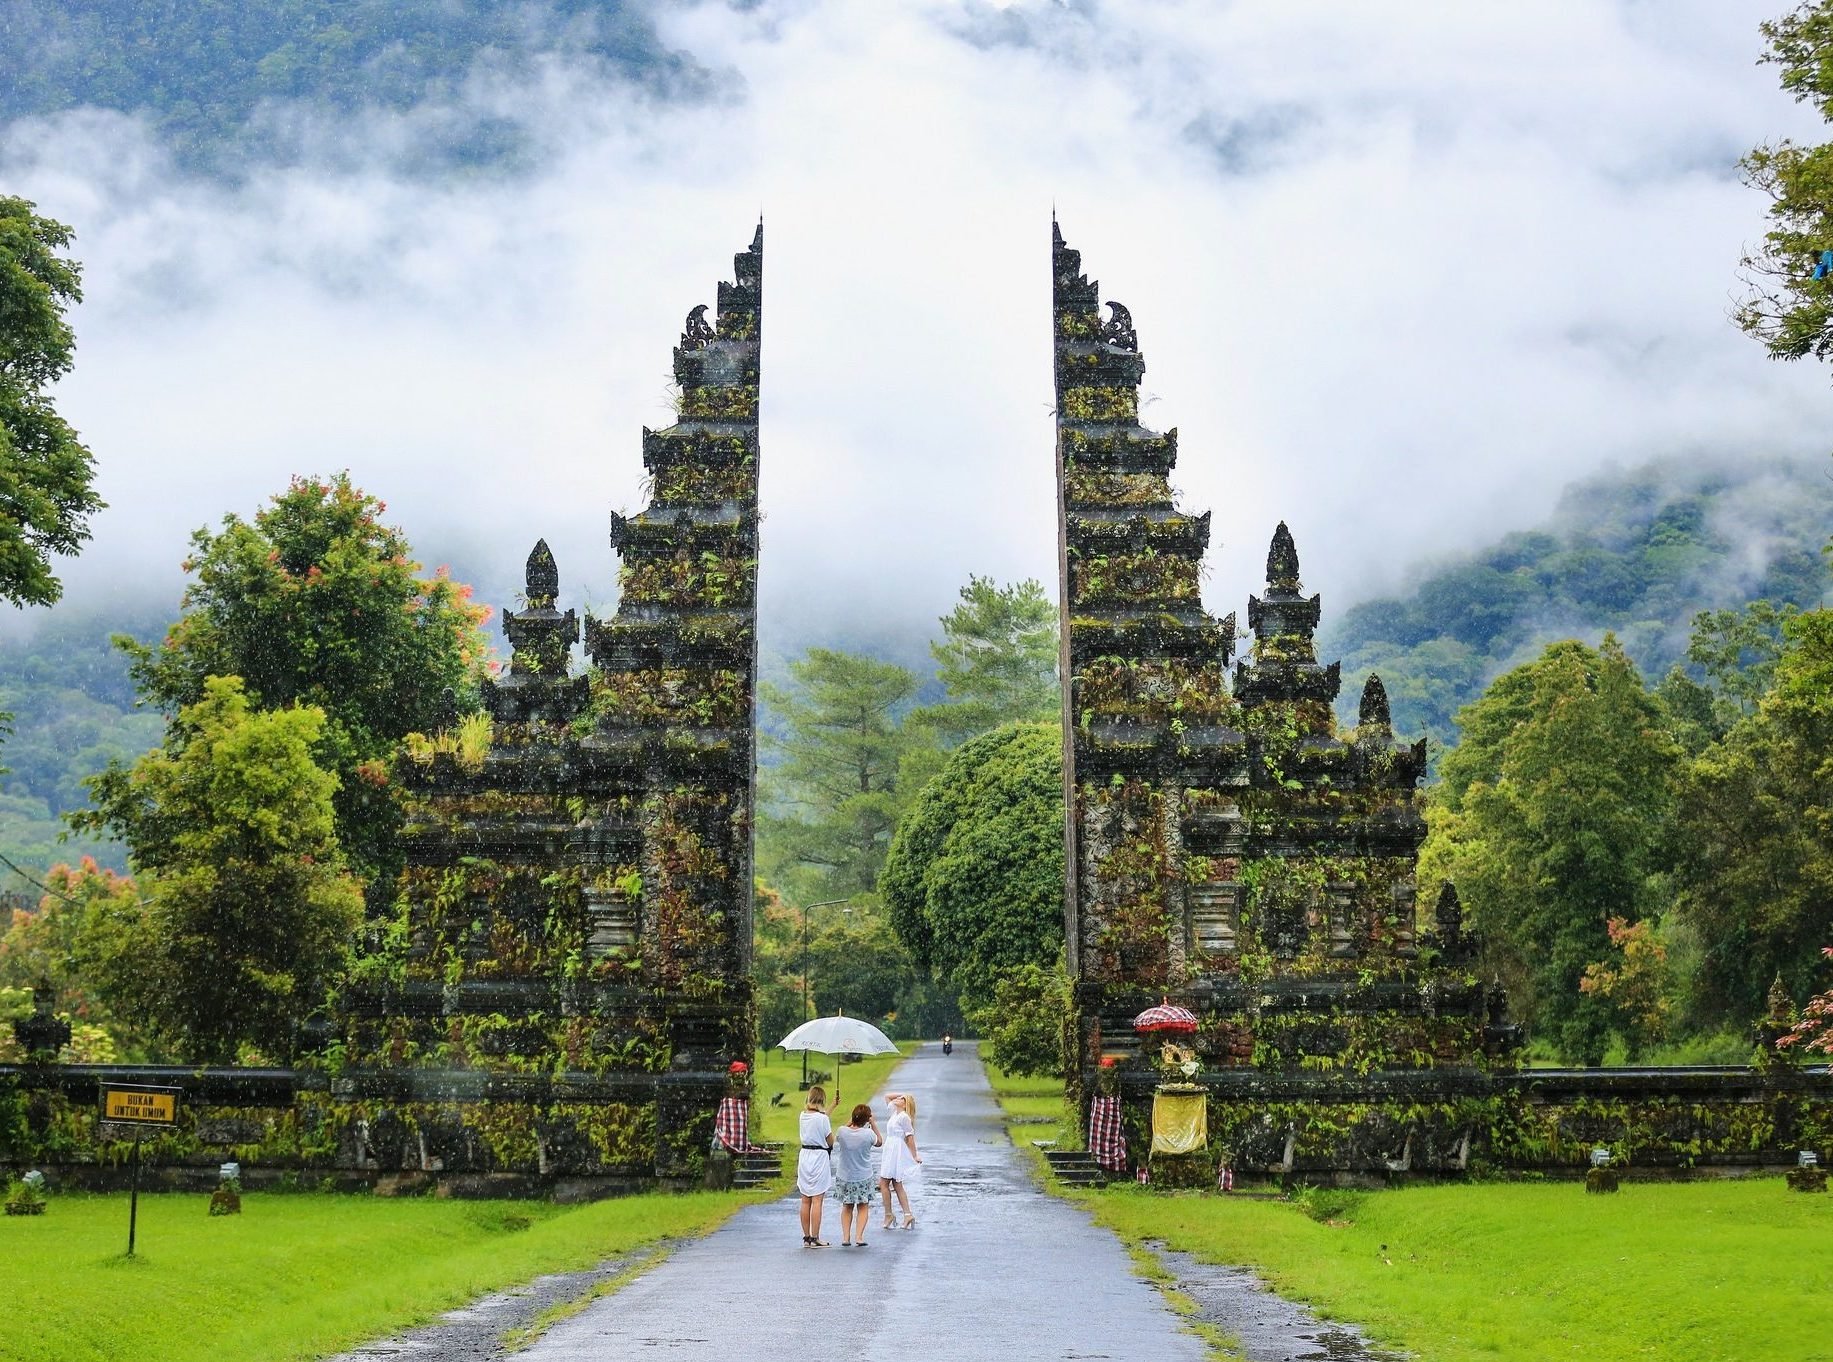 Handara Gate - Famous historical attraction in Bali